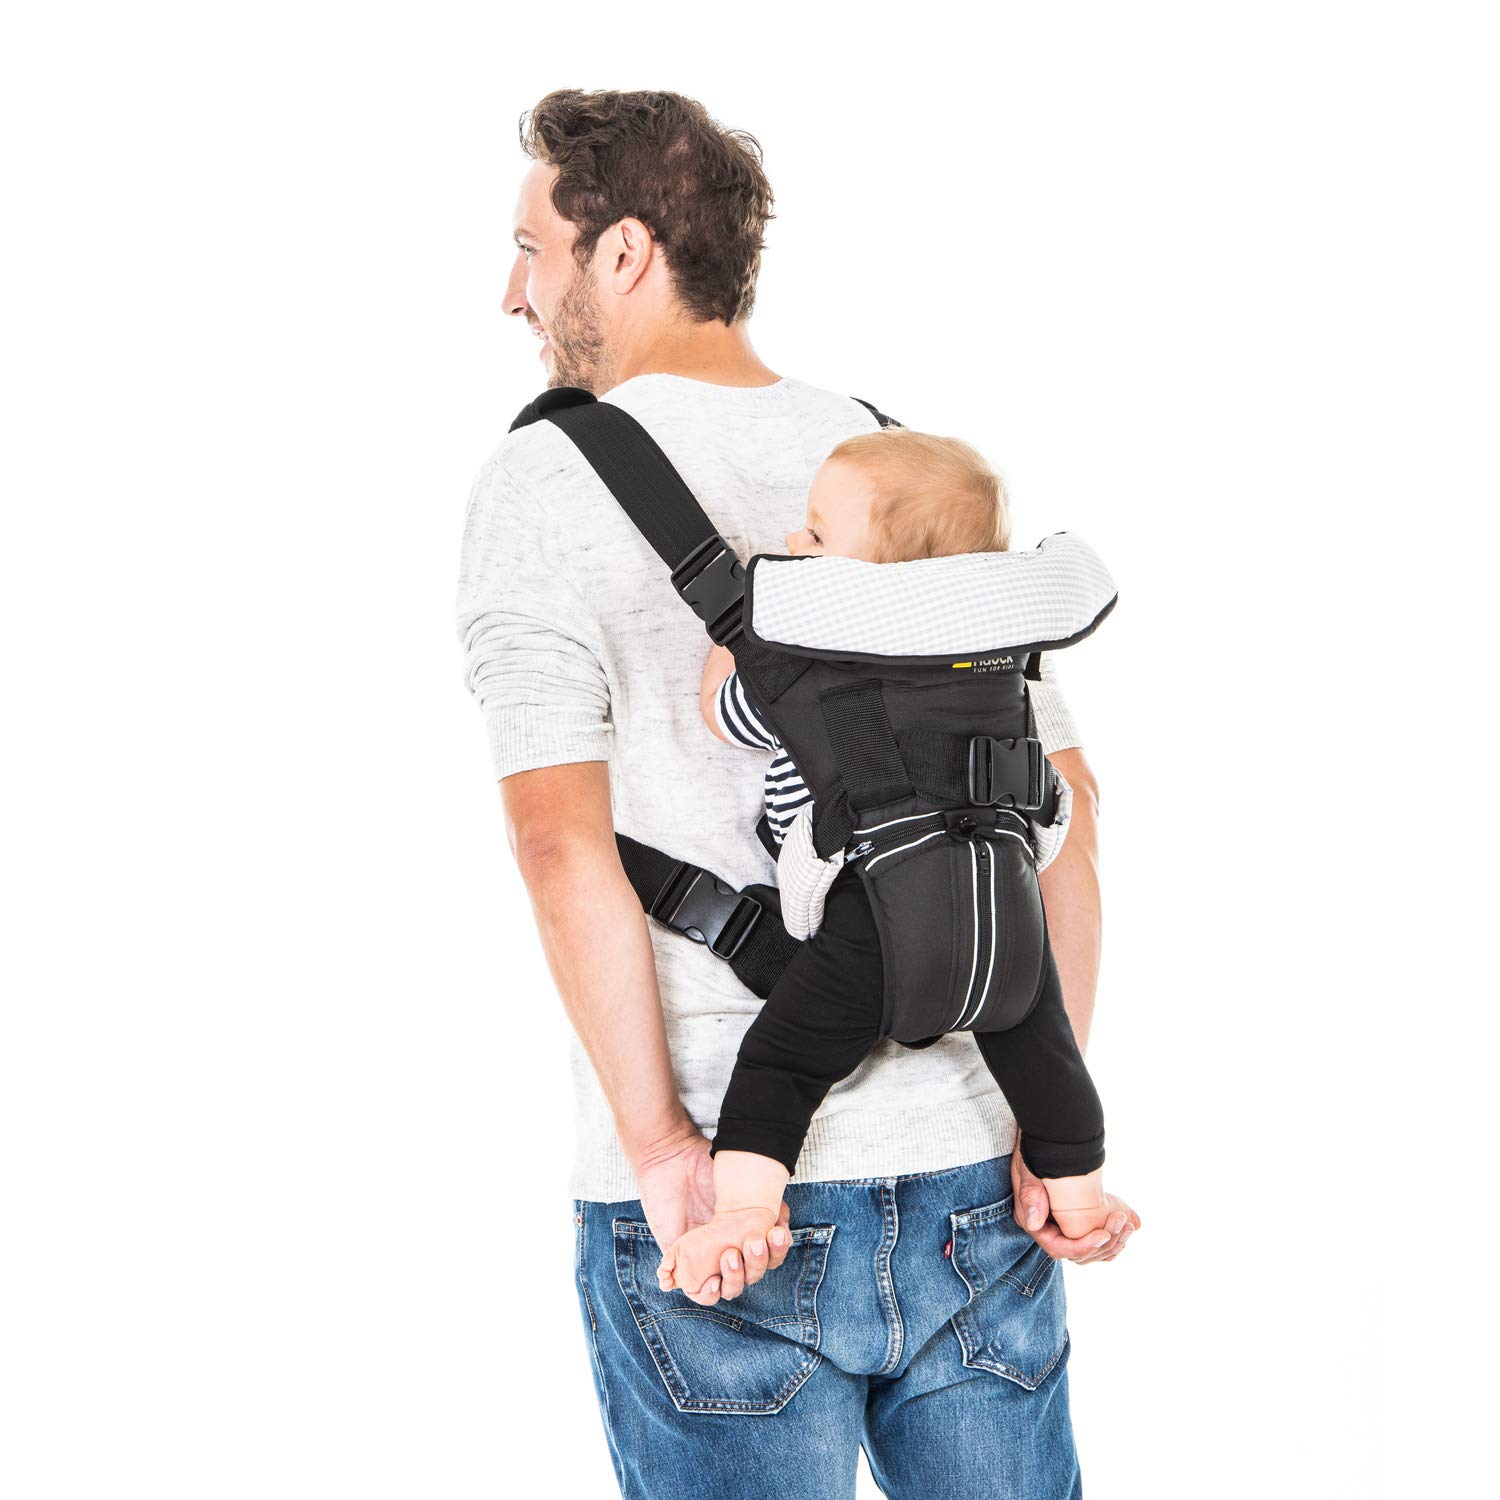 Hauck 4 Way Carrier Ergonomic Baby Carrier 4-in-1 Including Head and Neck Support, Four Carrying Ways from Birth up to 12 kg - Black